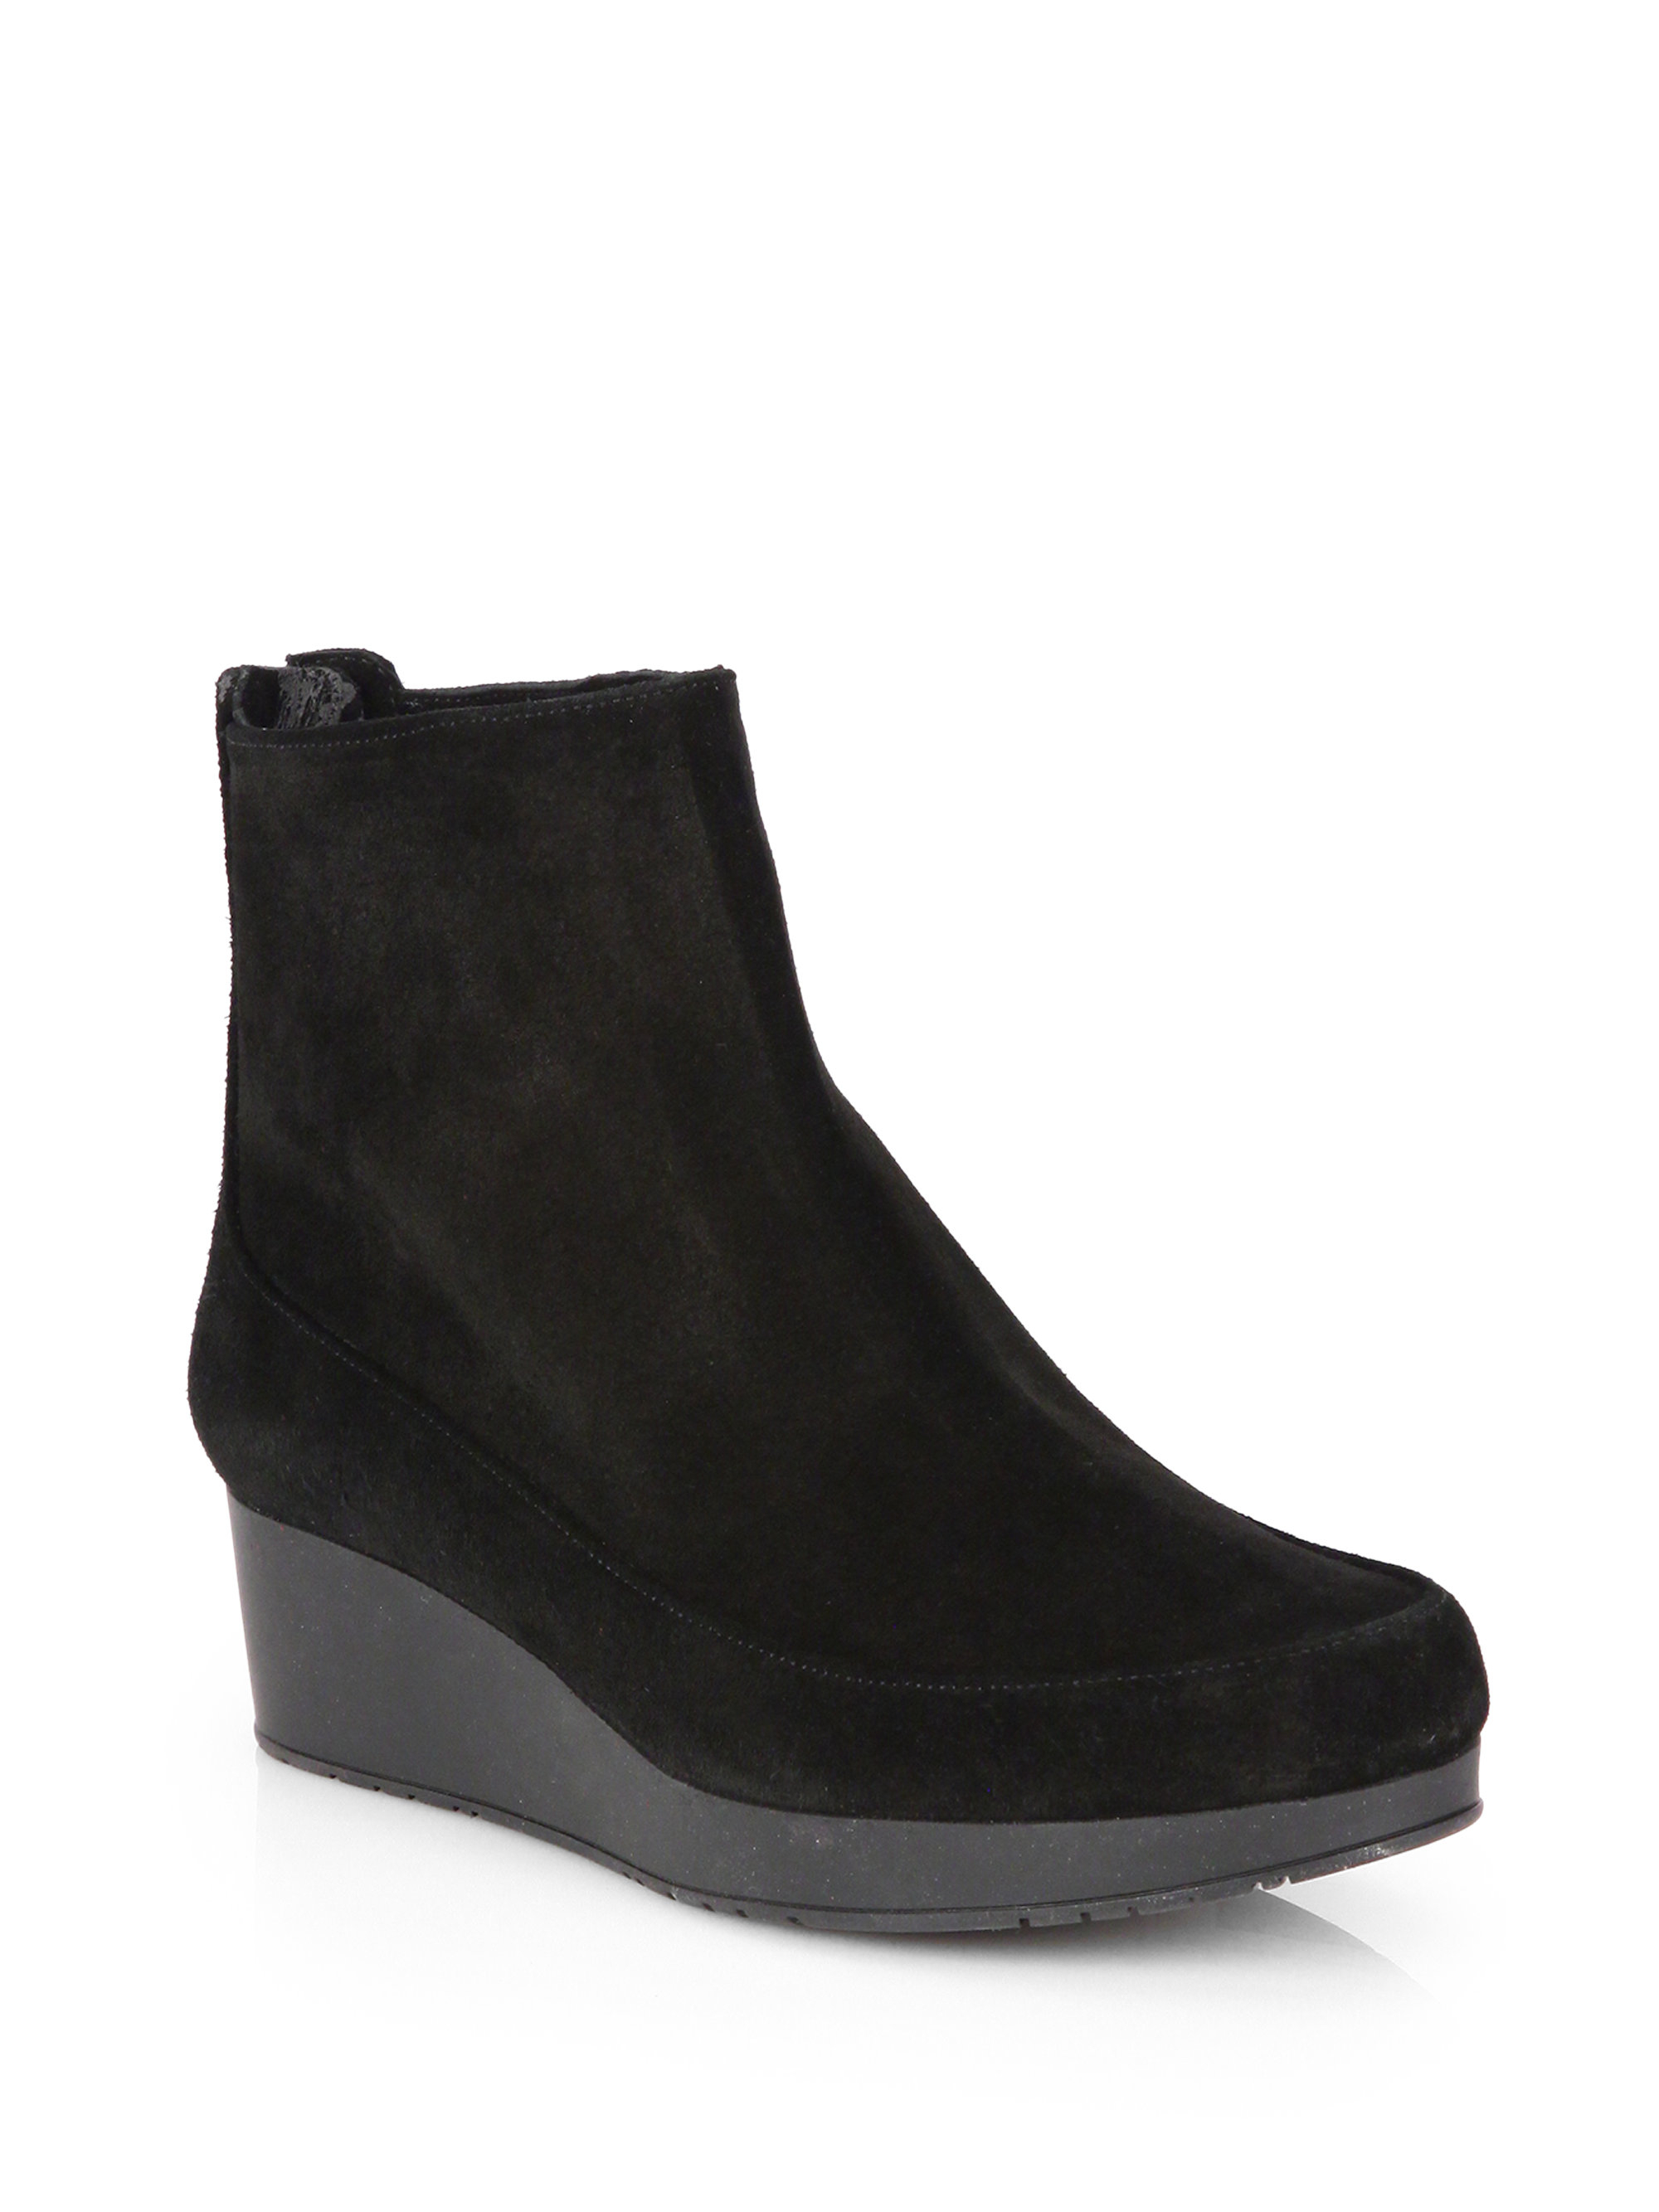 Robert Clergerie Stretch Suede Platform Wedge Ankle Boots in Black | Lyst